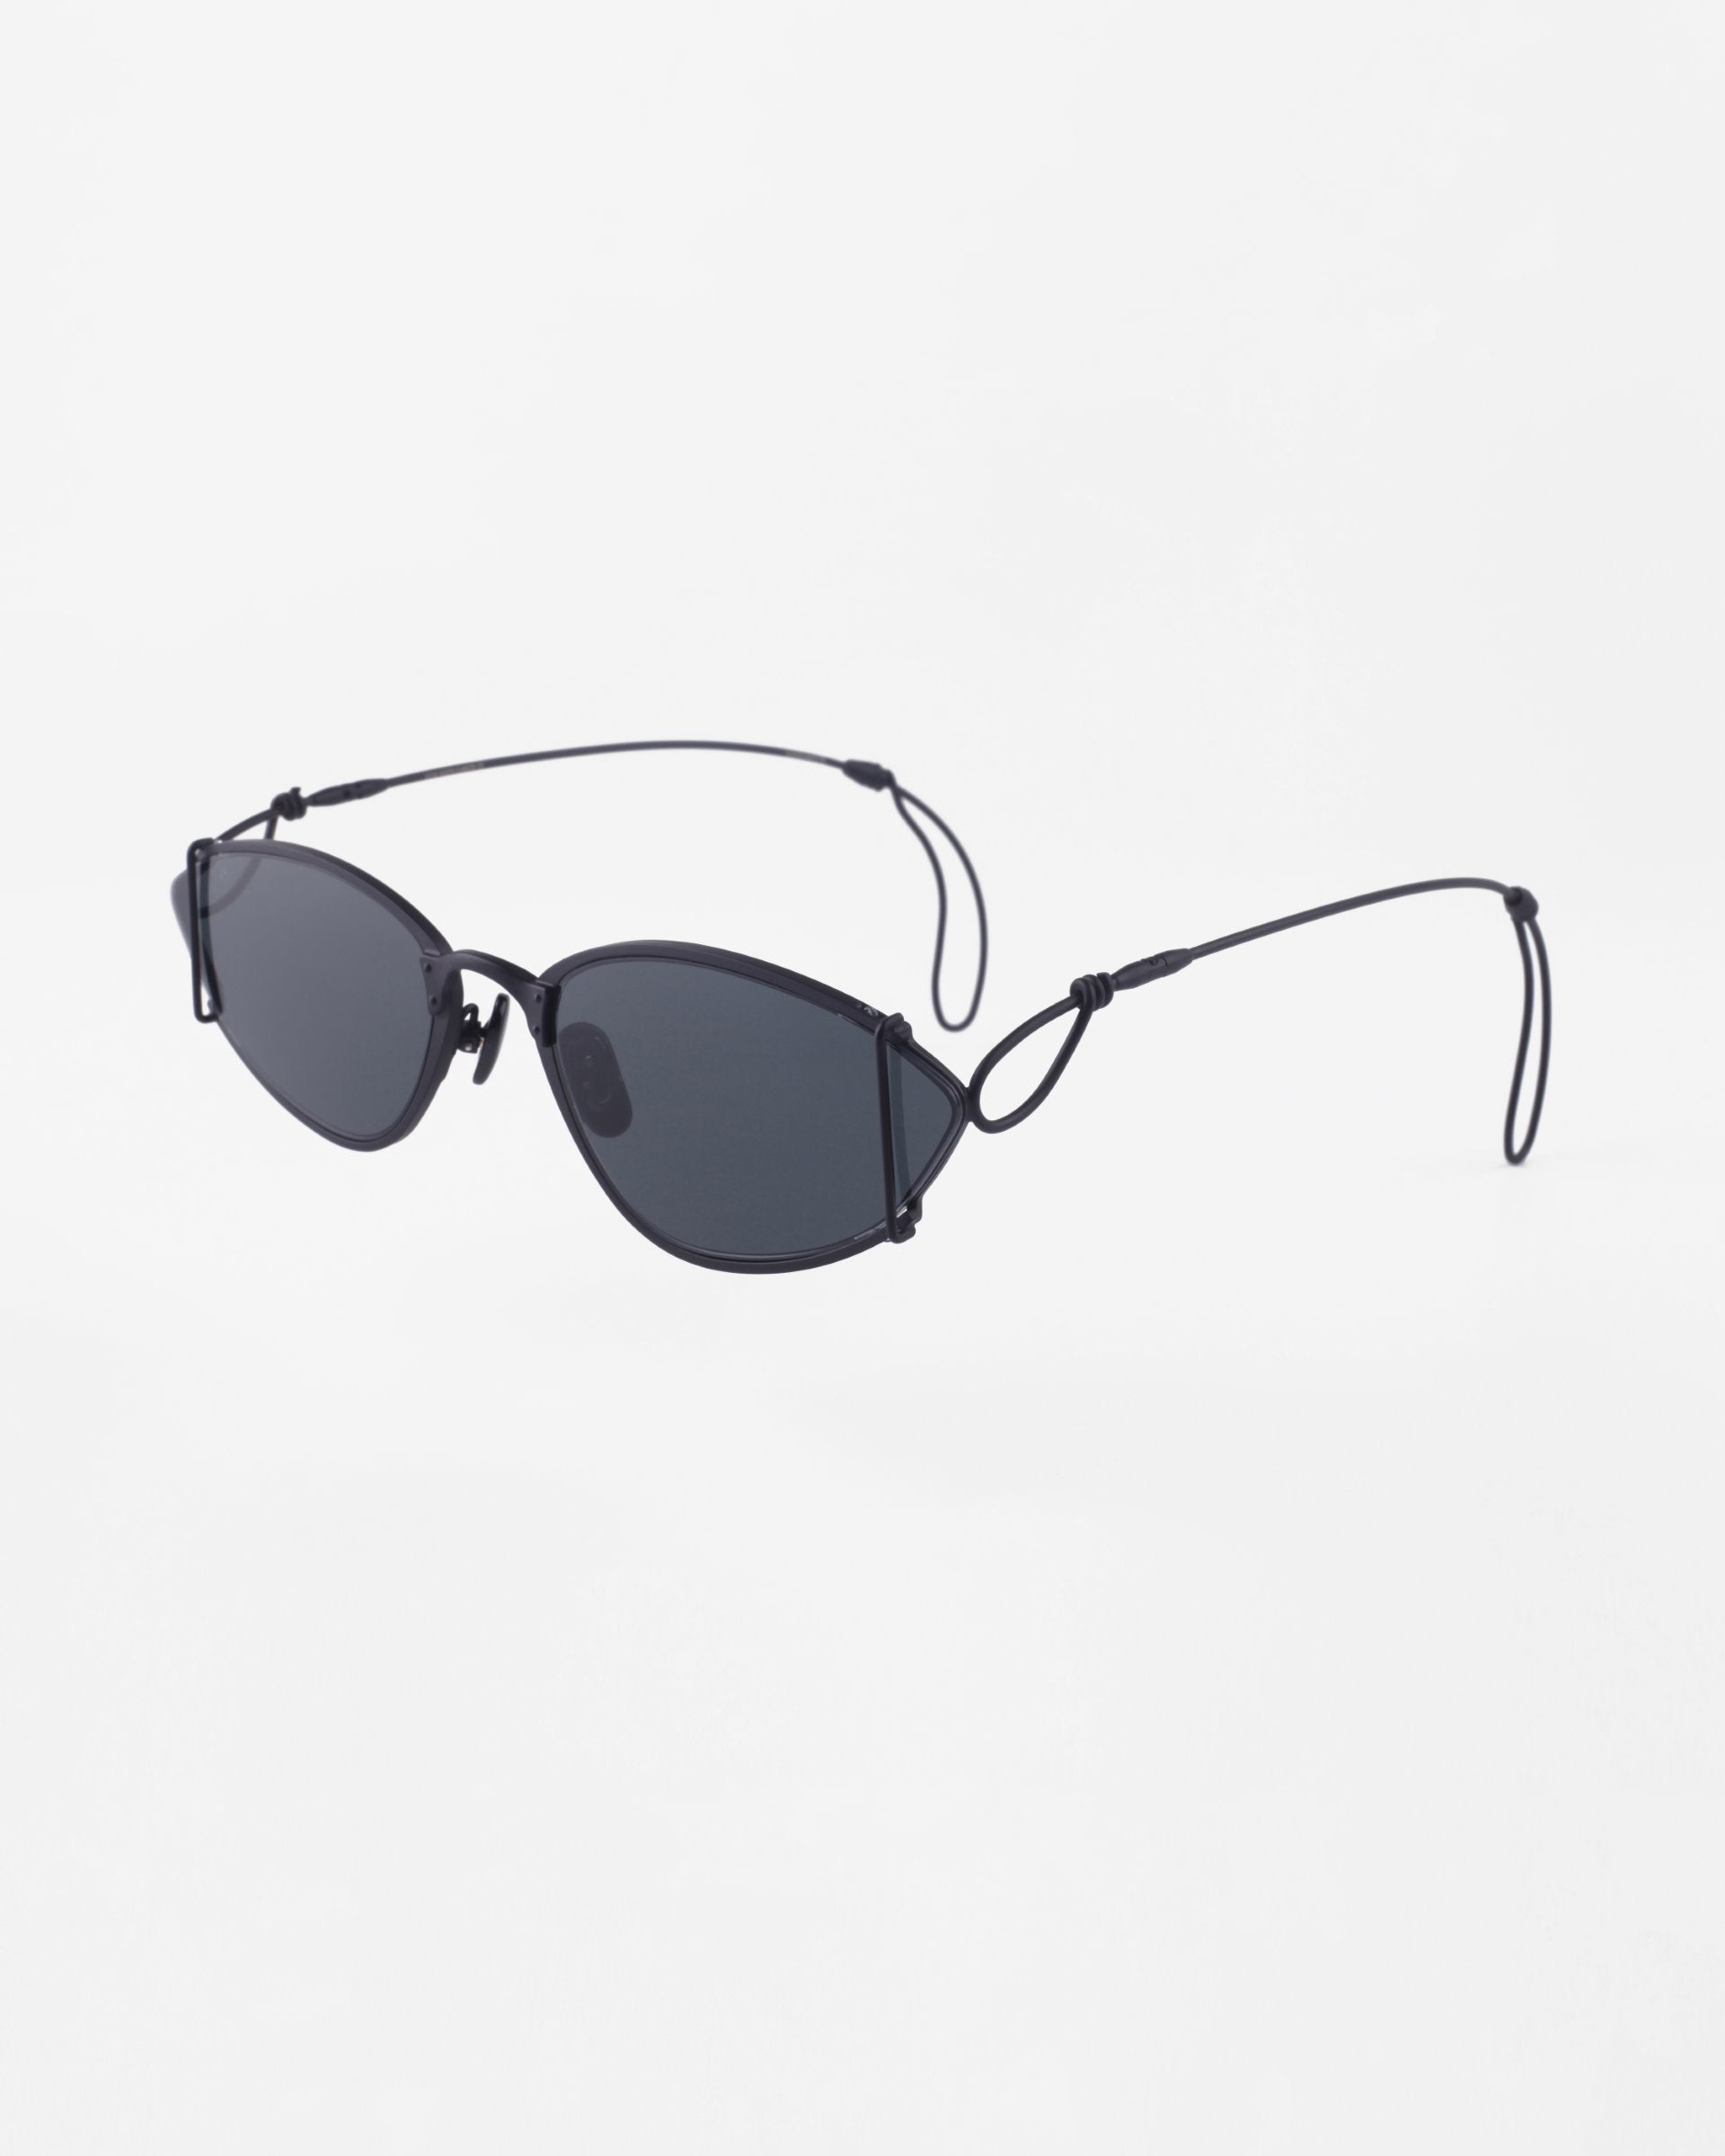 A pair of sleek, black, oval-shaped For Art&#39;s Sake® Ornate sunglasses with thin wire arms and adjustable earpieces. The minimalist design features dark lenses with 100% UVA &amp; UVB protection and a lightweight frame positioned against a white background.